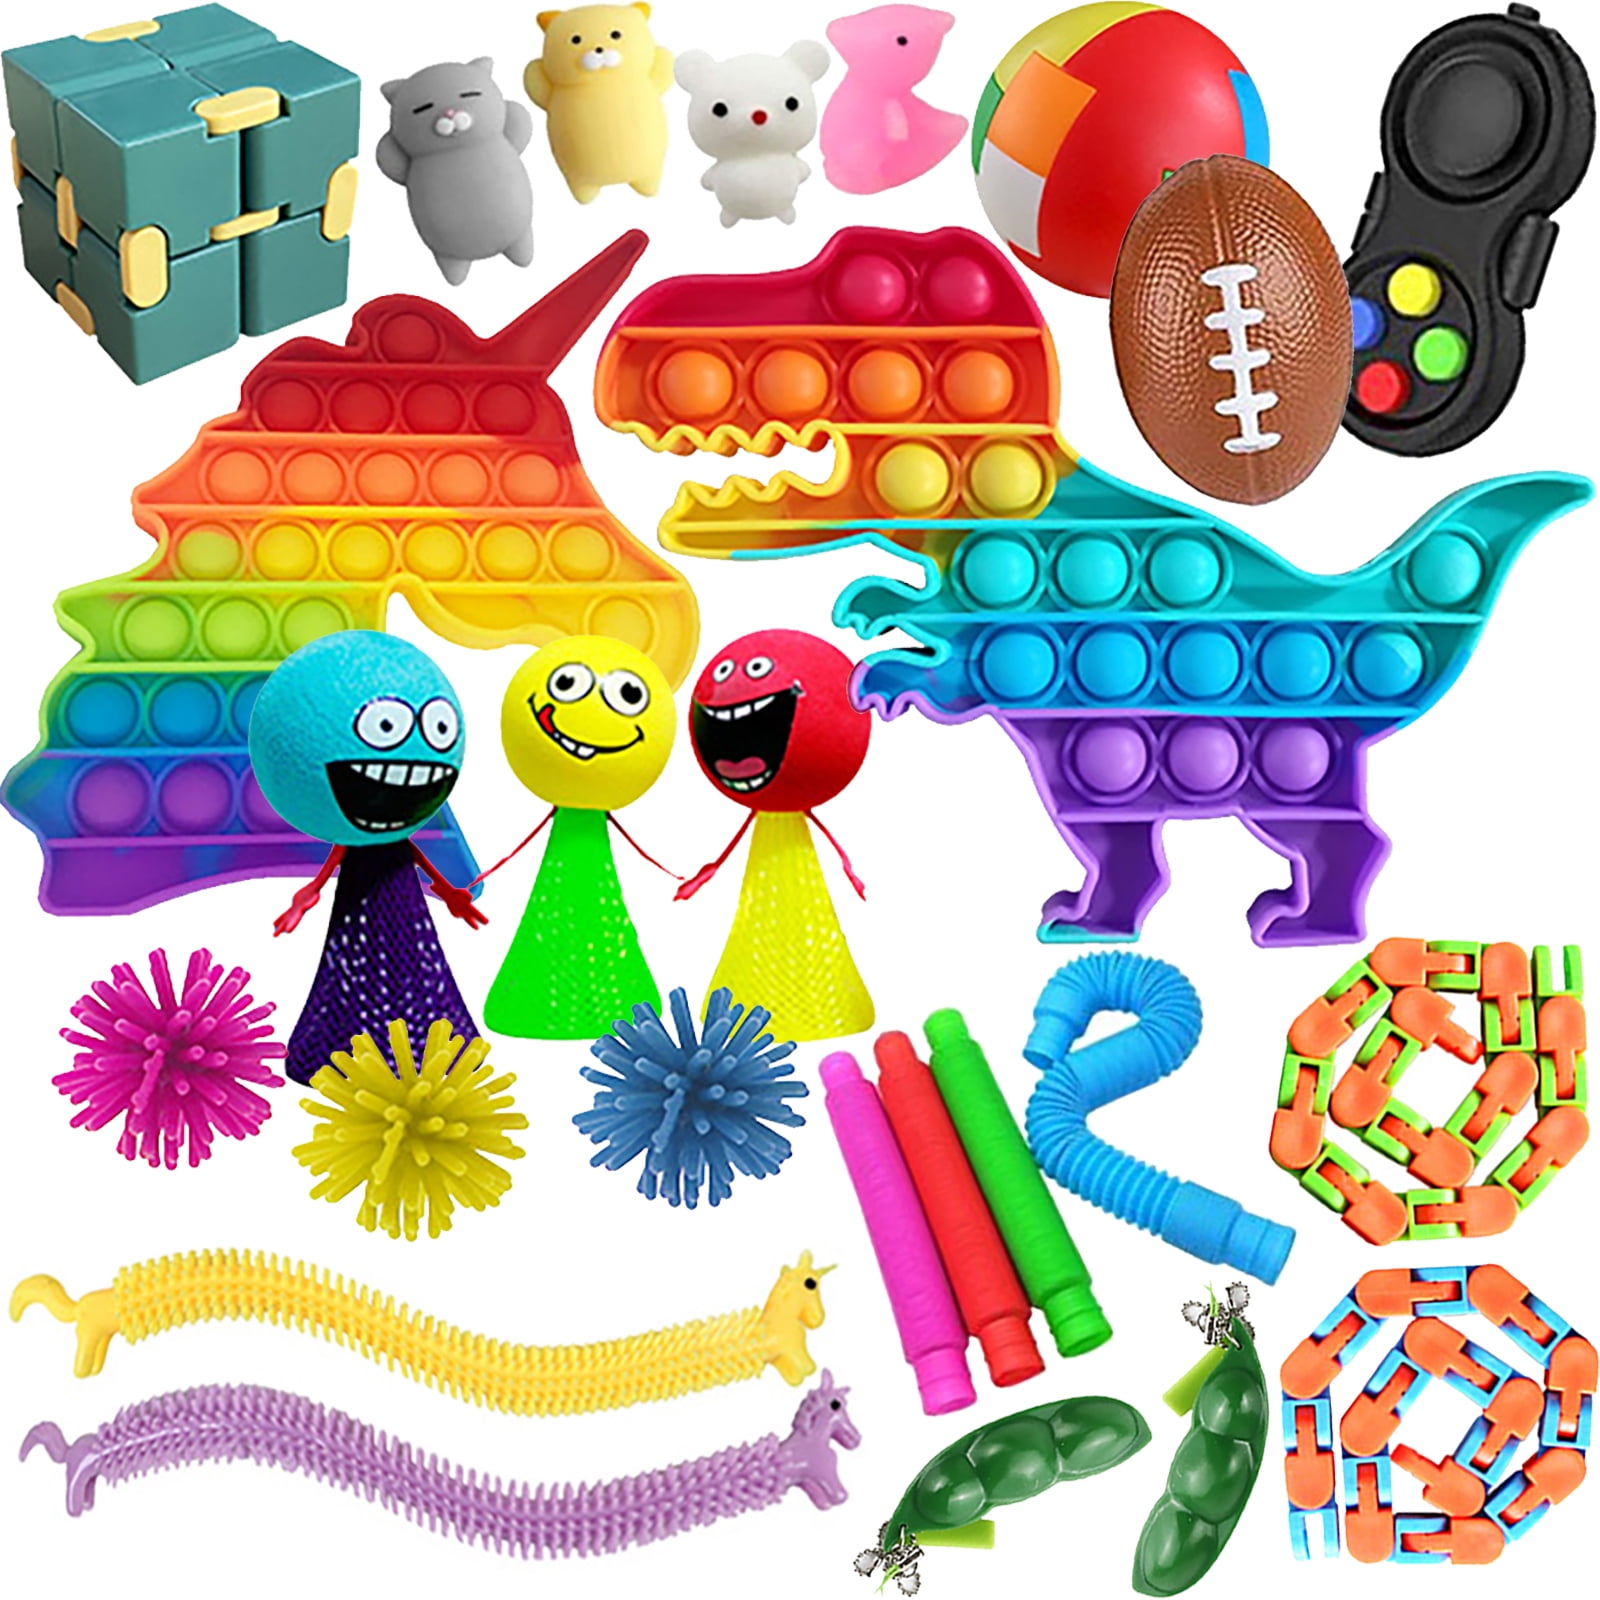 Skylety 20 Pieces Fidget Bike Chain Flippy Chain Toys for ADHD Stress Relief Finger Toys Fidget Flippy Key Chains for Adults and Teens 